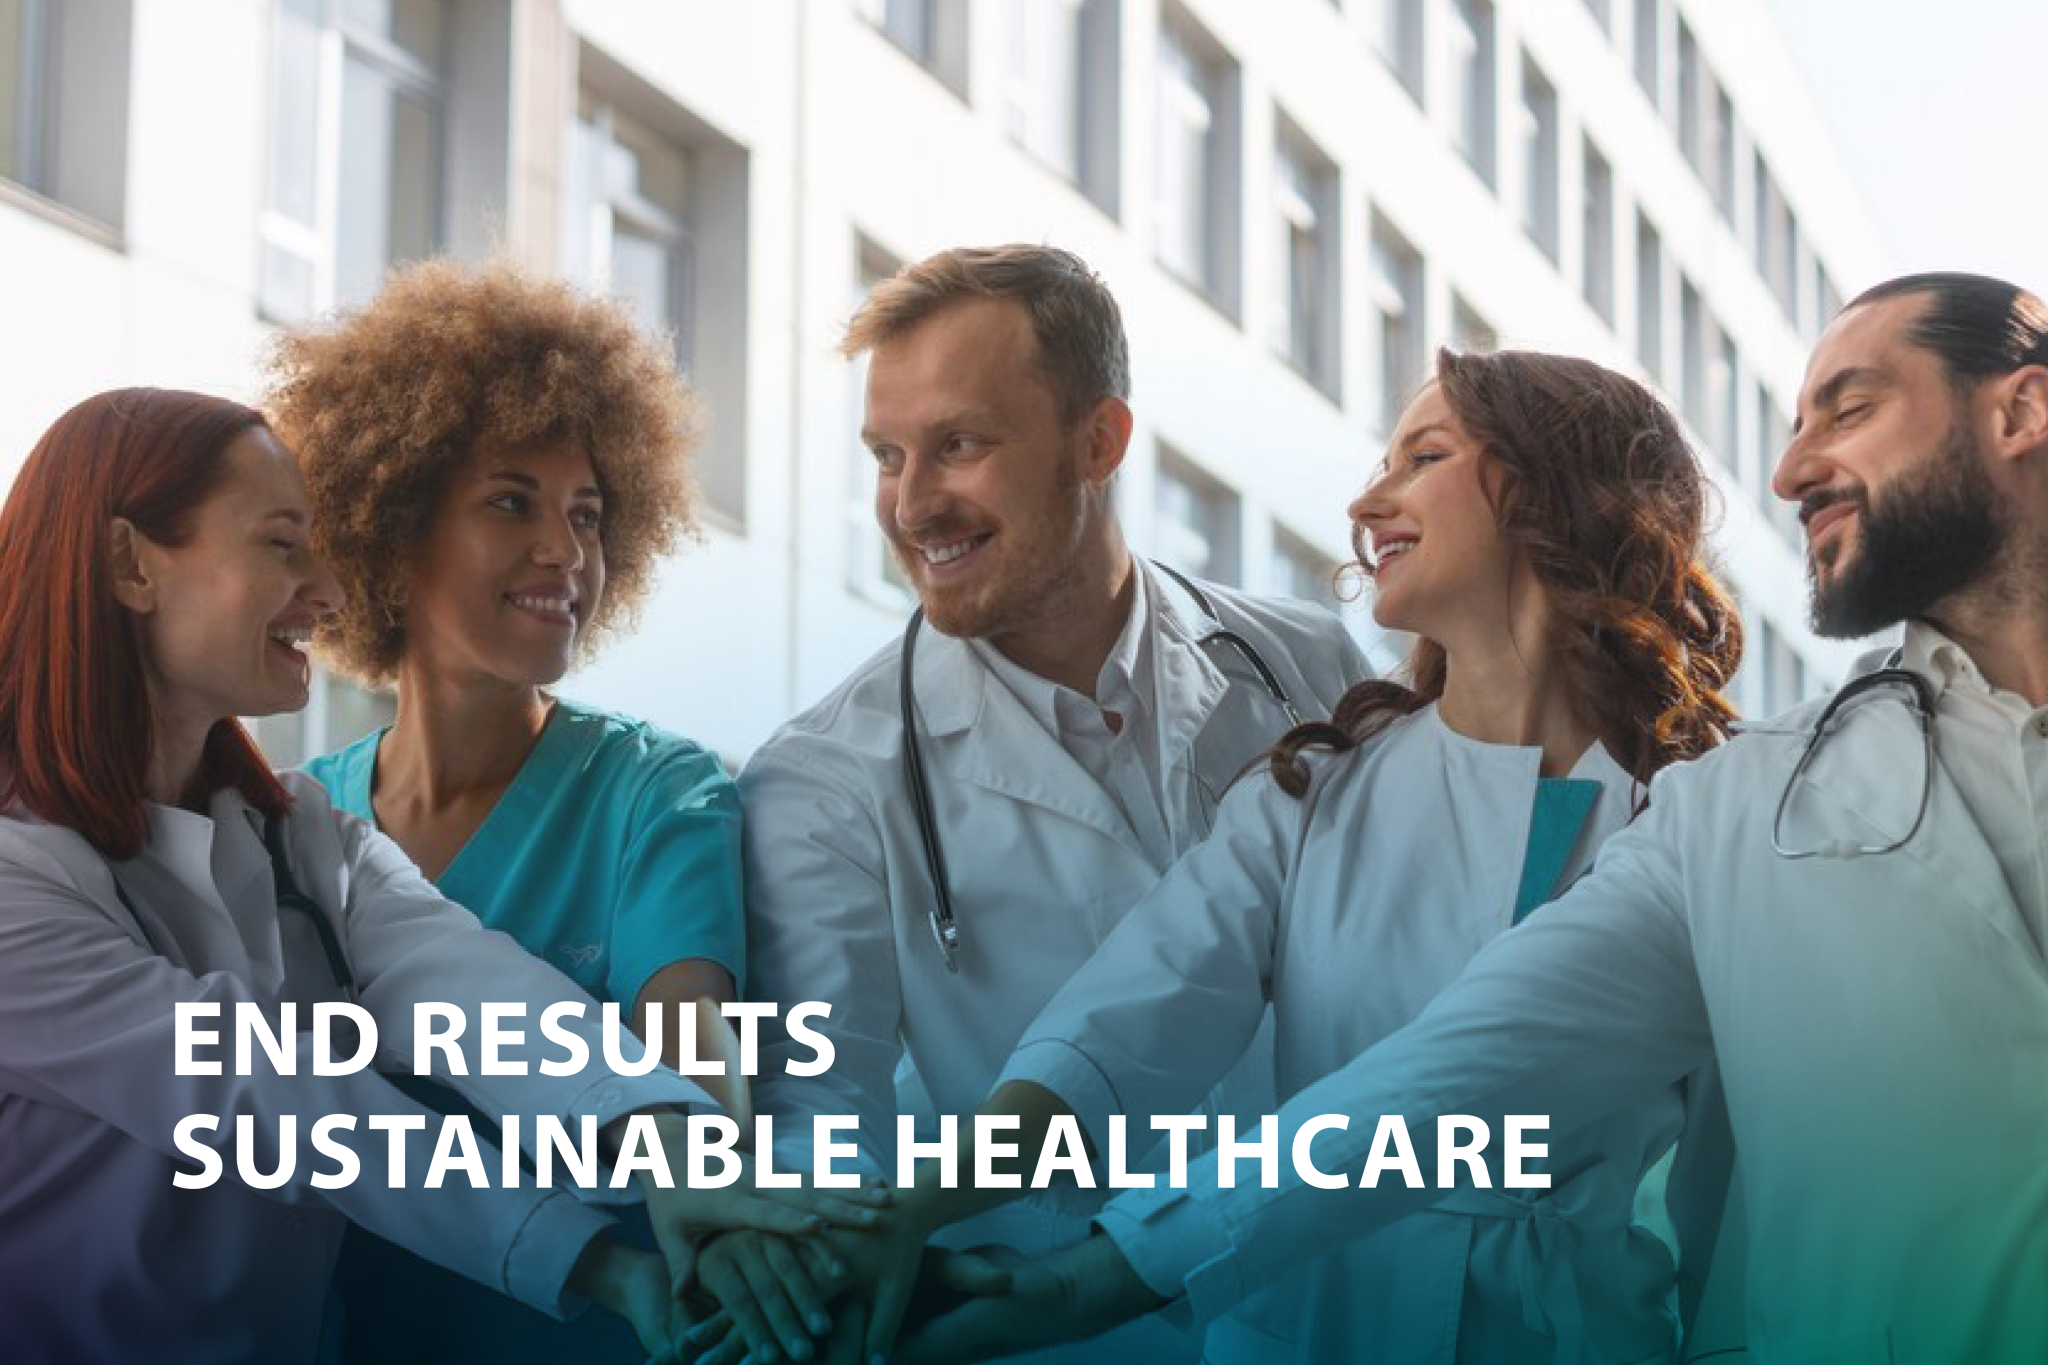 endresults sustainable healthcare